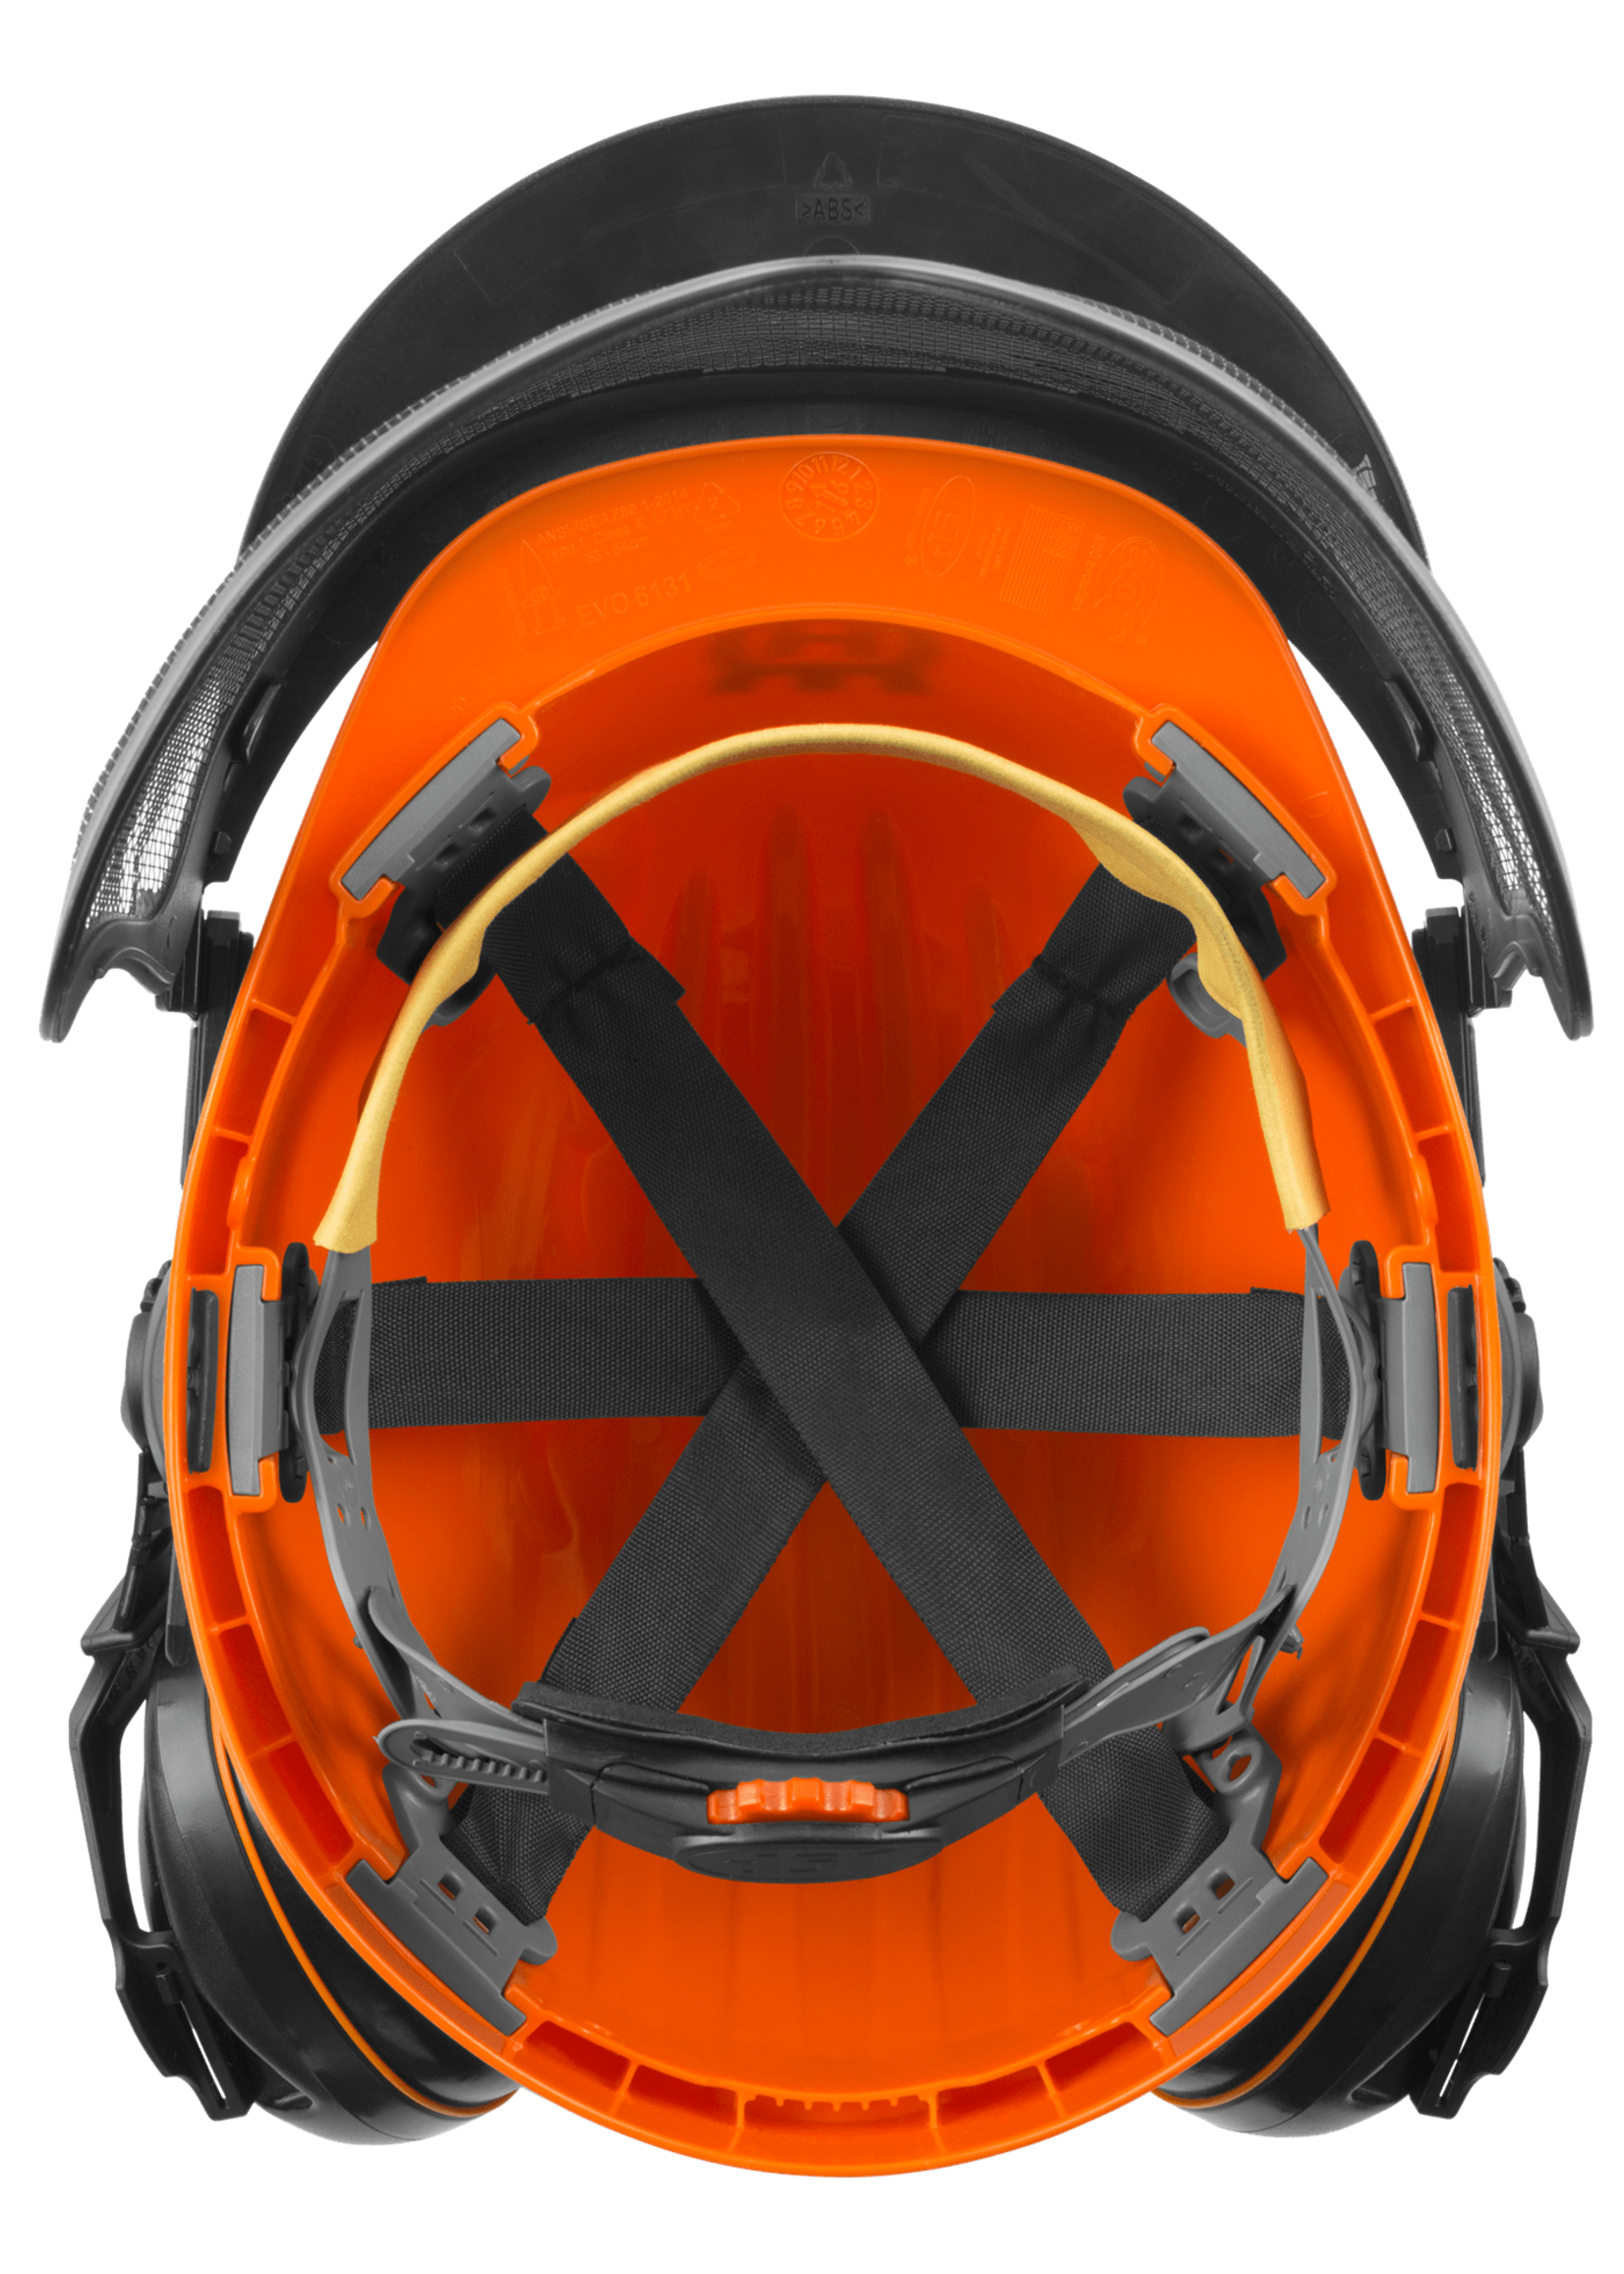 Casque forestier Functional radio FM - Reybaud Motoculture 84